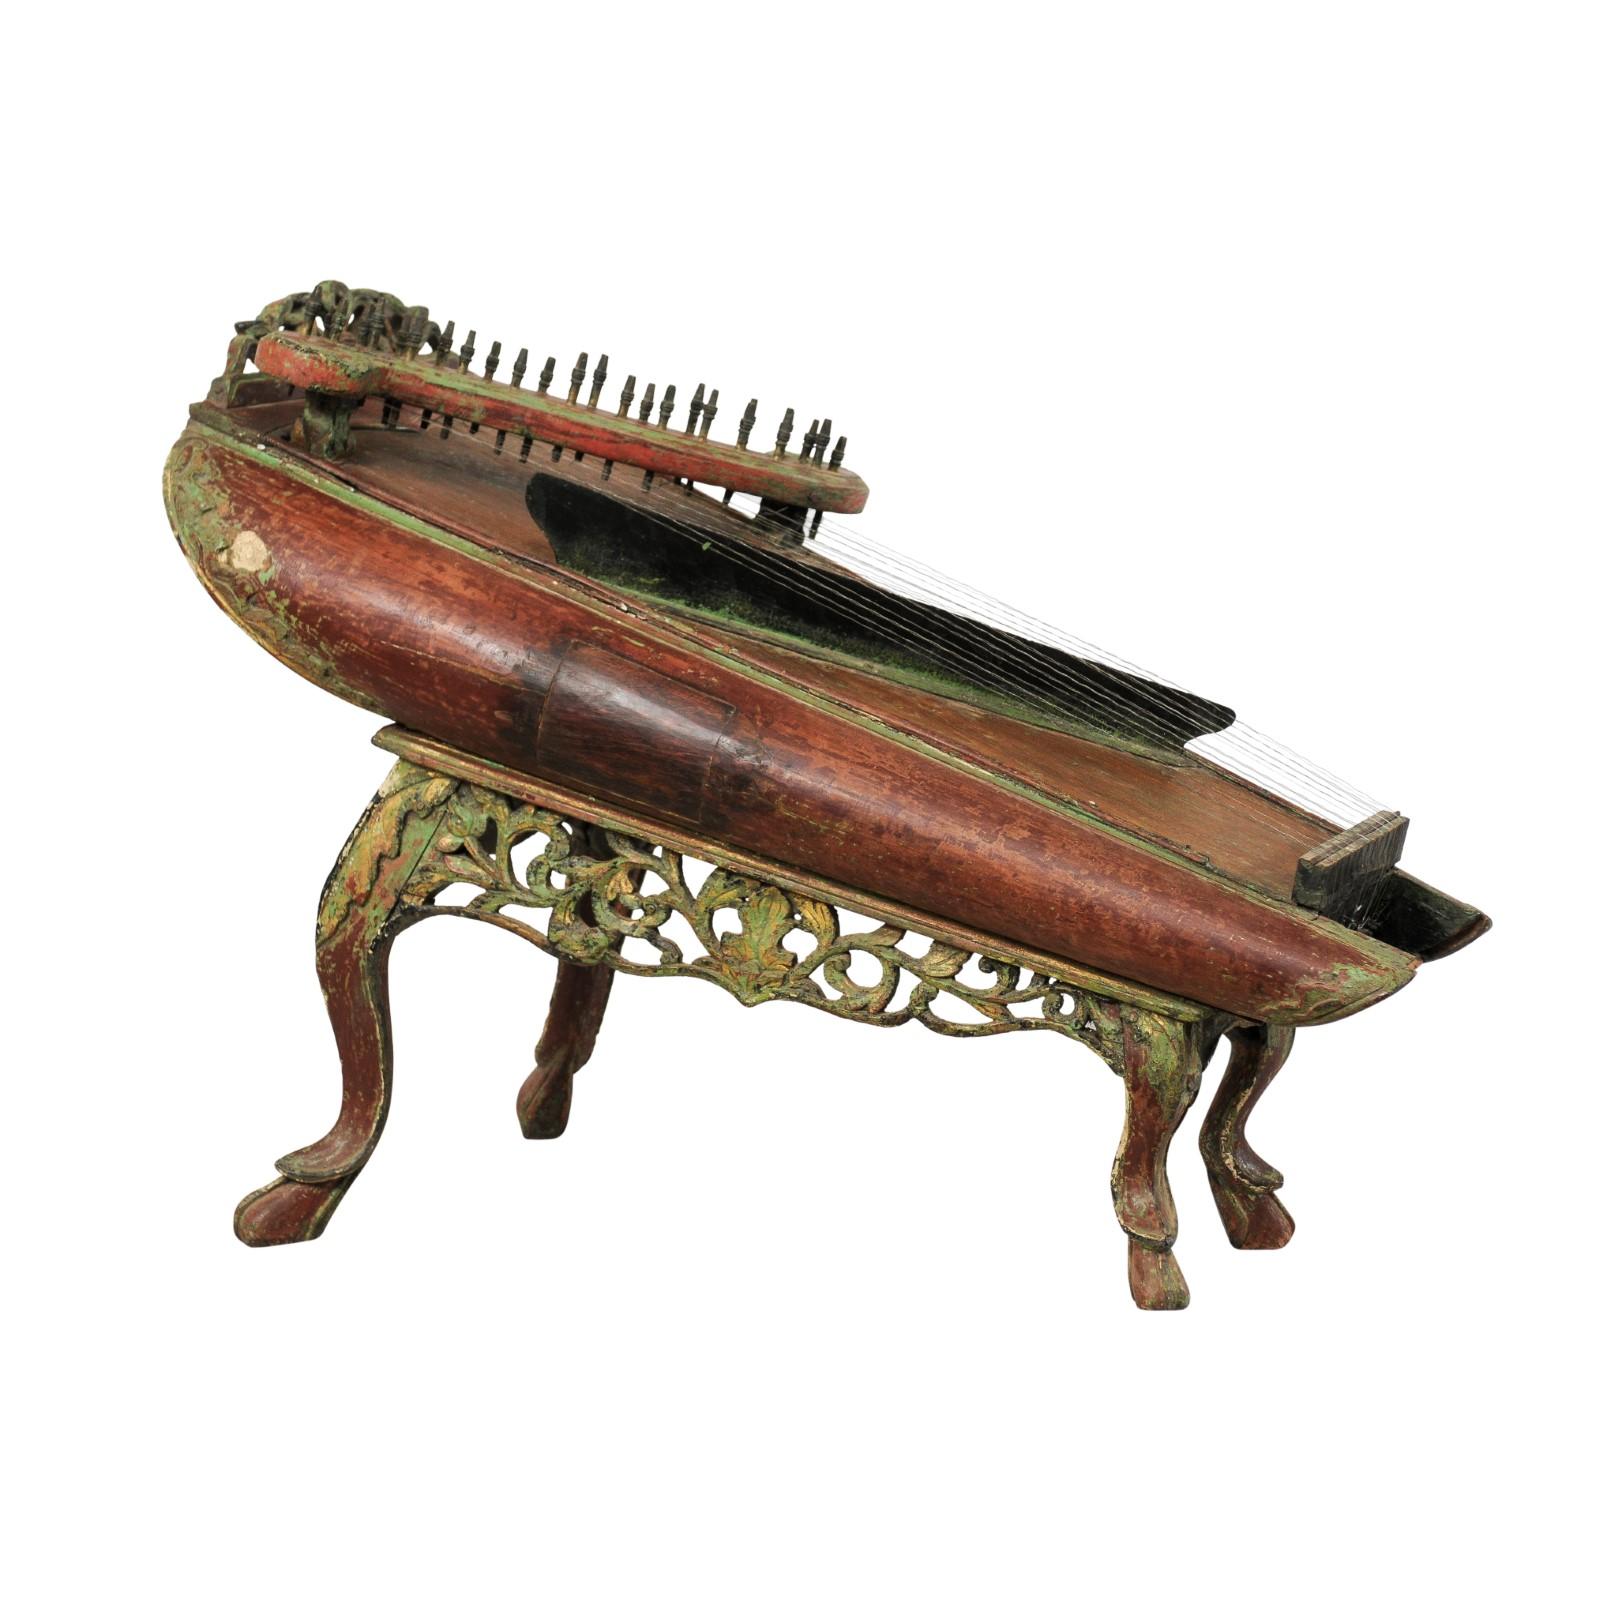 19th Century Celempung Musical Instrument from Java, Indonesia